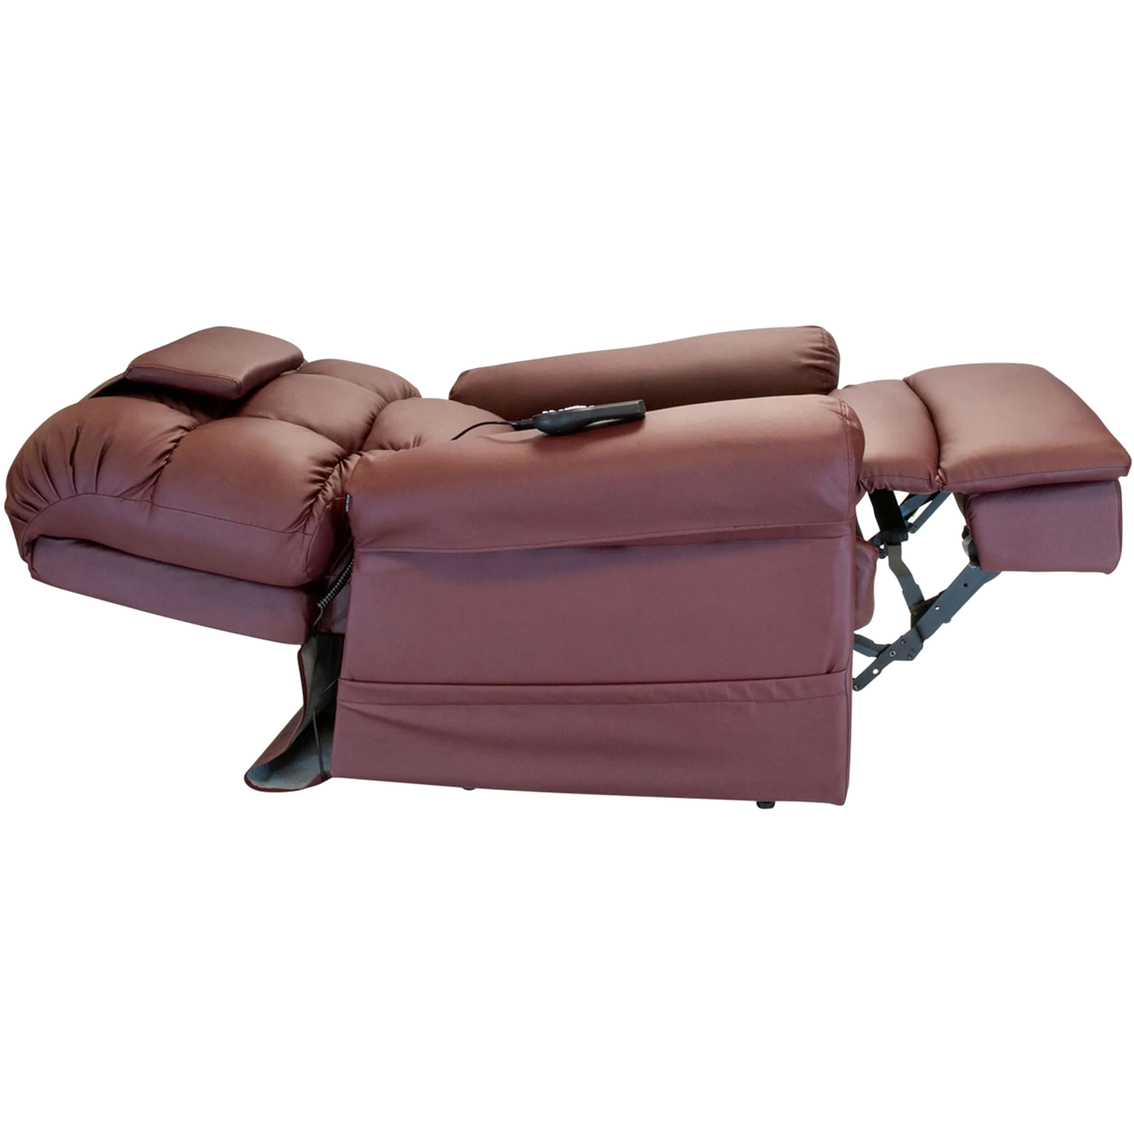 WiseLift WL450R Sleeper Recliner Chair - Image 5 of 8